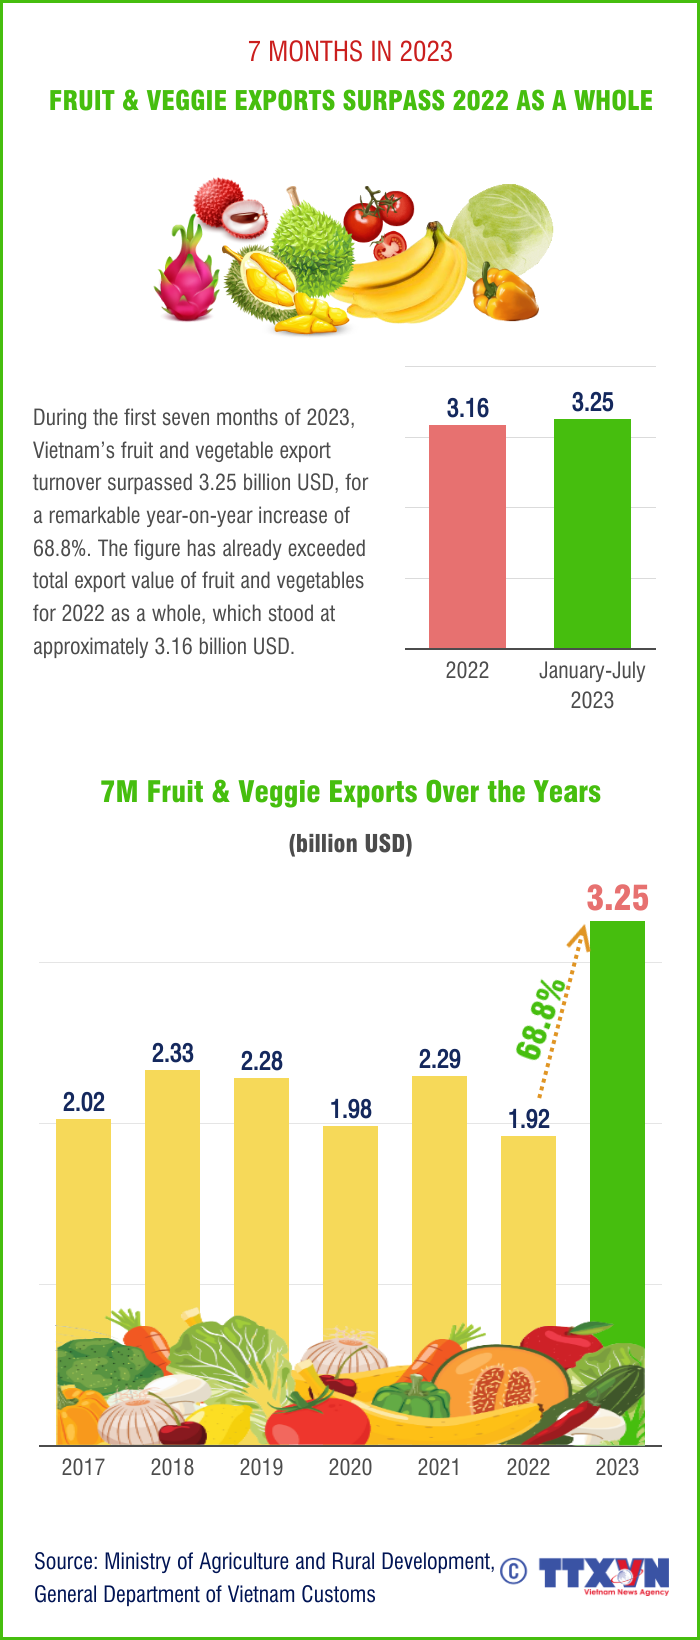 Fruit & veggie exports in first seven months surpass all of 2022